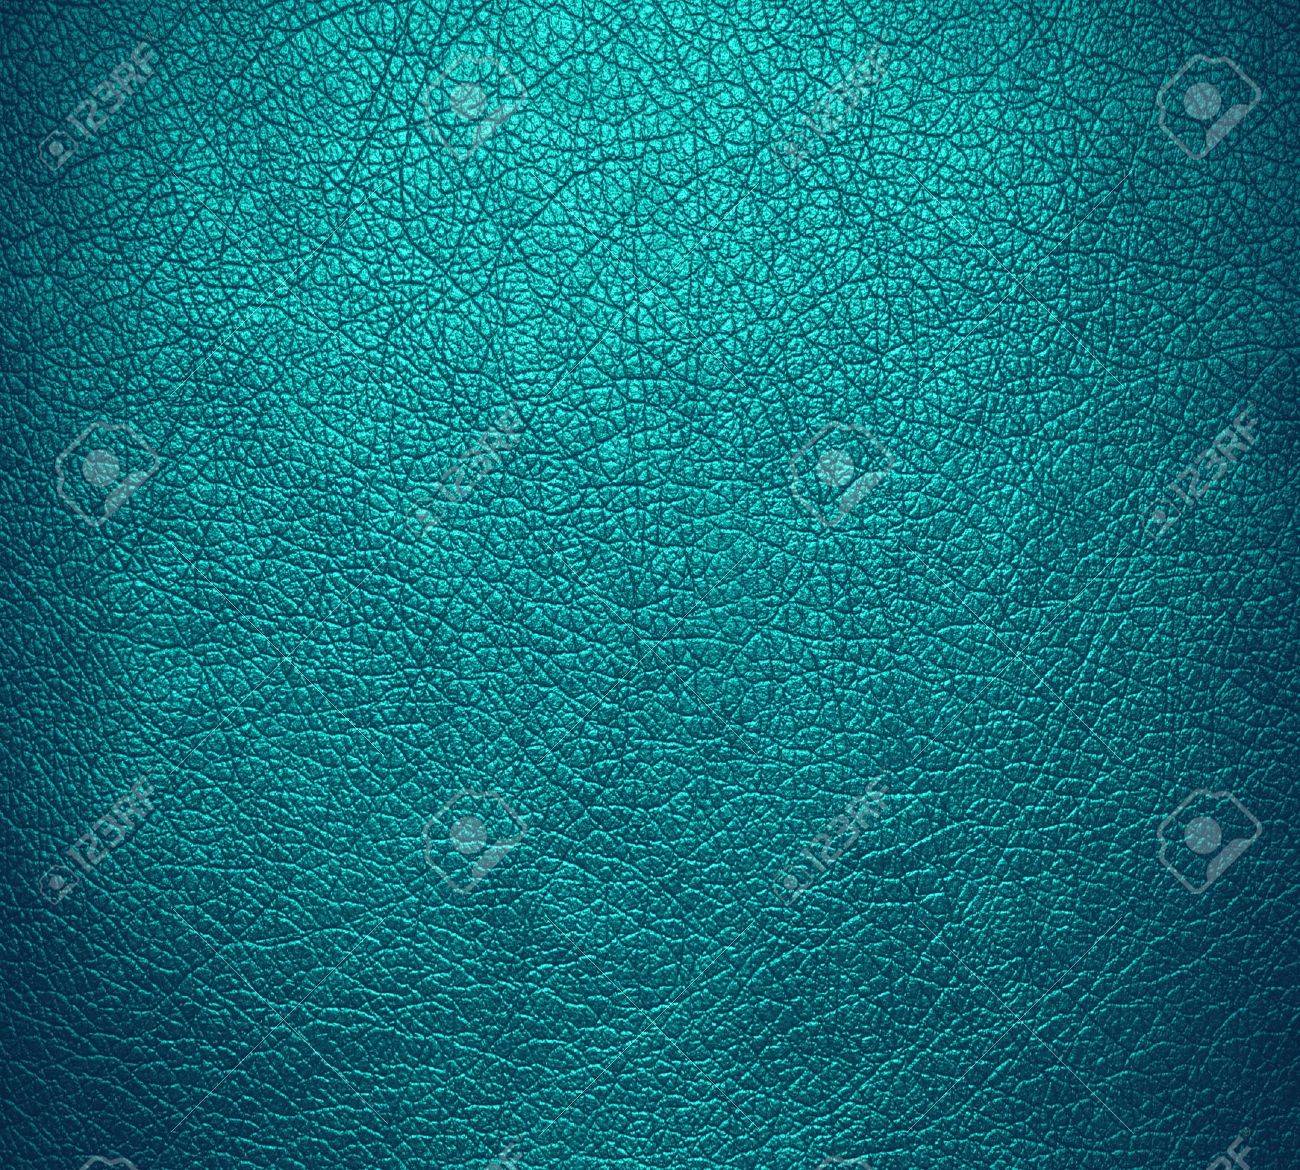 Teal Blue Leather Texture Background Stock Photo Picture And 1300x1170